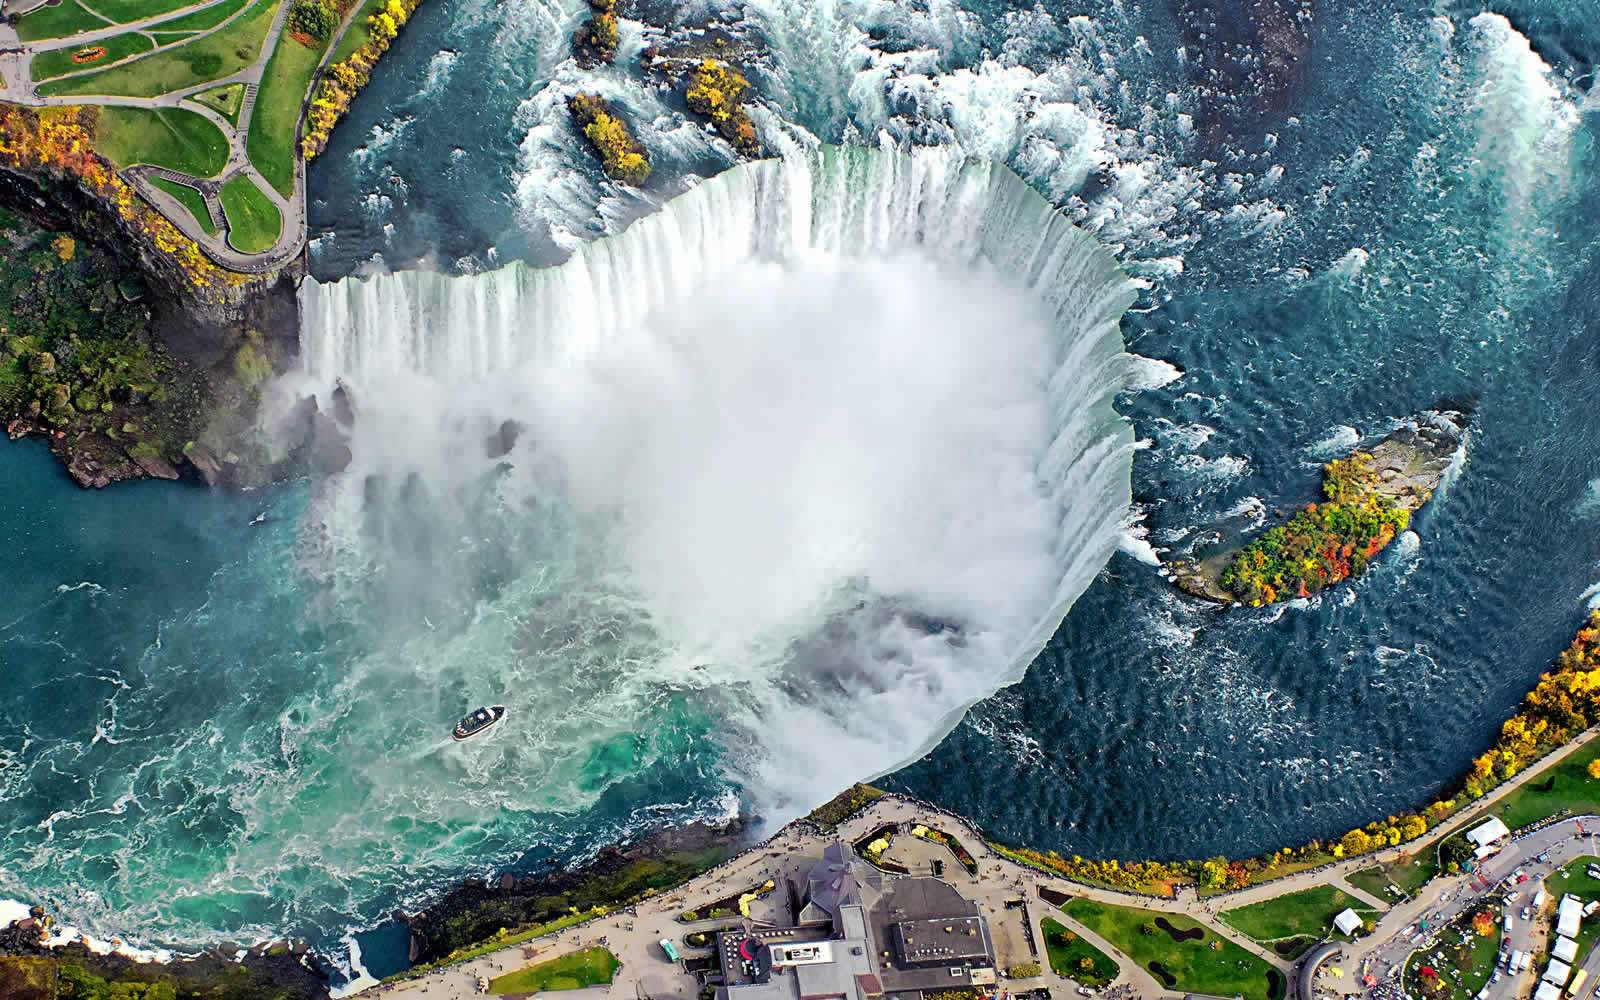 We’ll Give You an 🌮 International Food to Try Based on the ✈️ Places You Would Rather Visit Niagara Falls